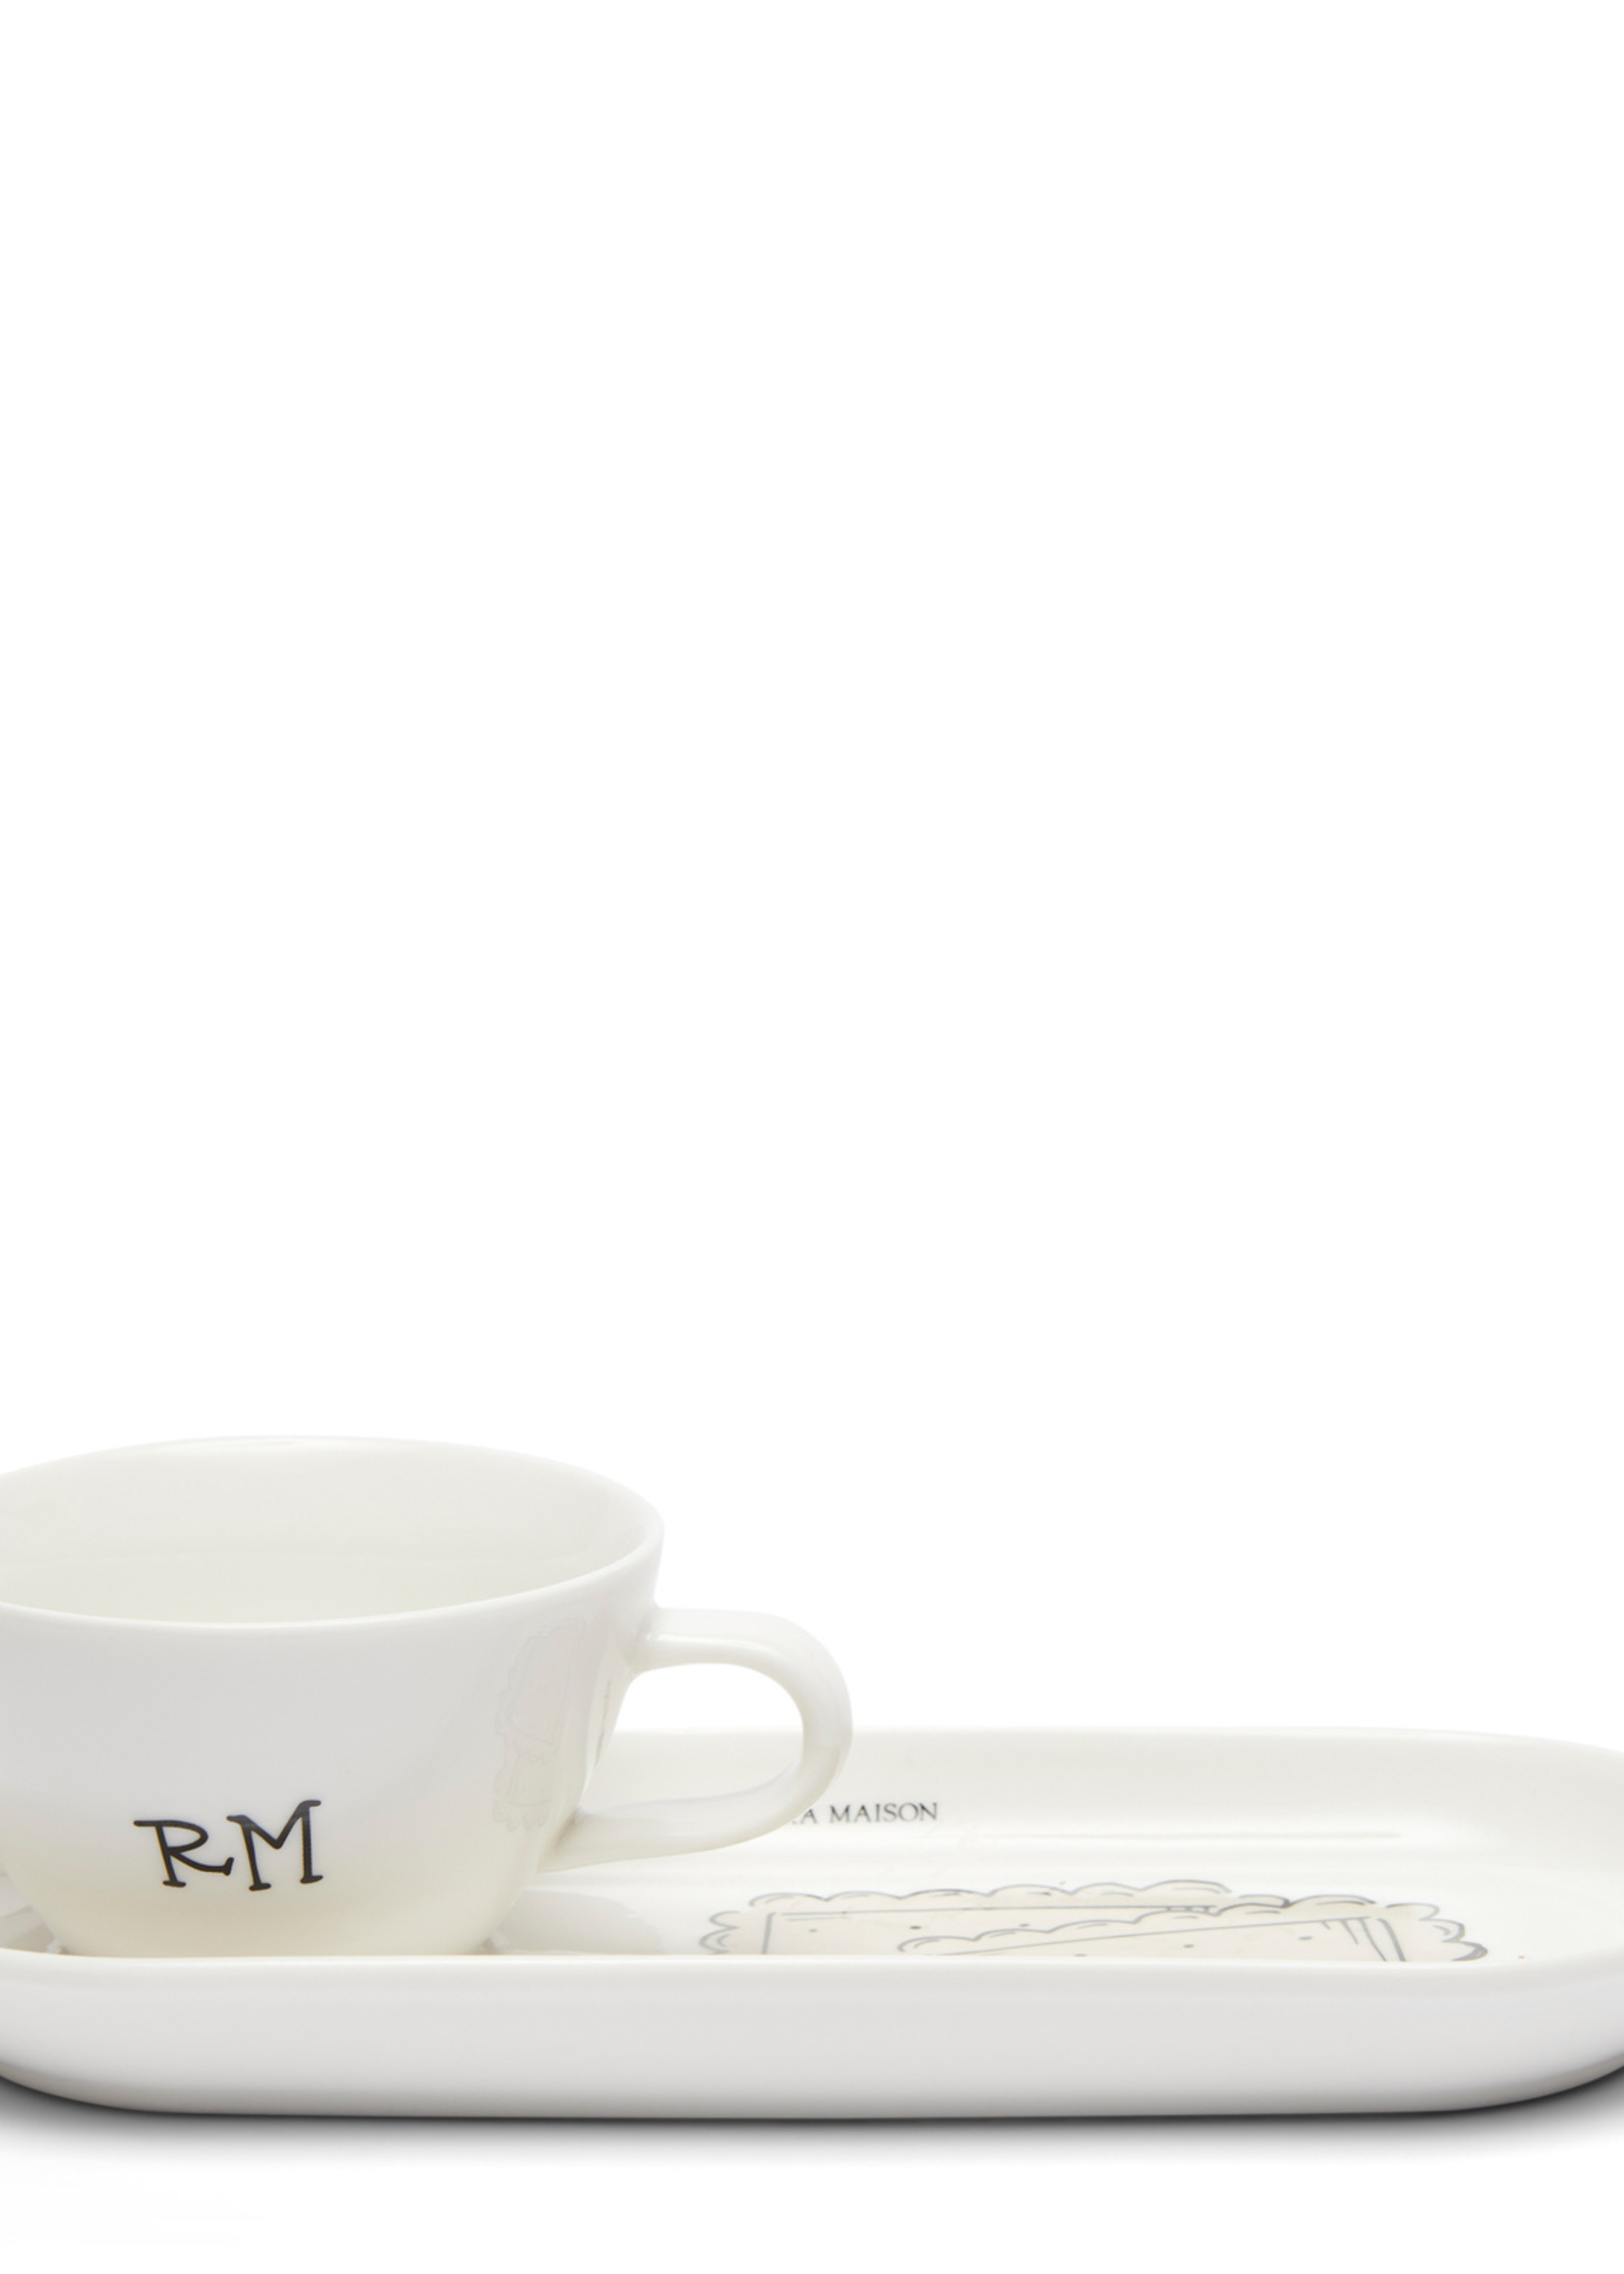 Riviera Maison Coffee Cookie Cup & Saucer